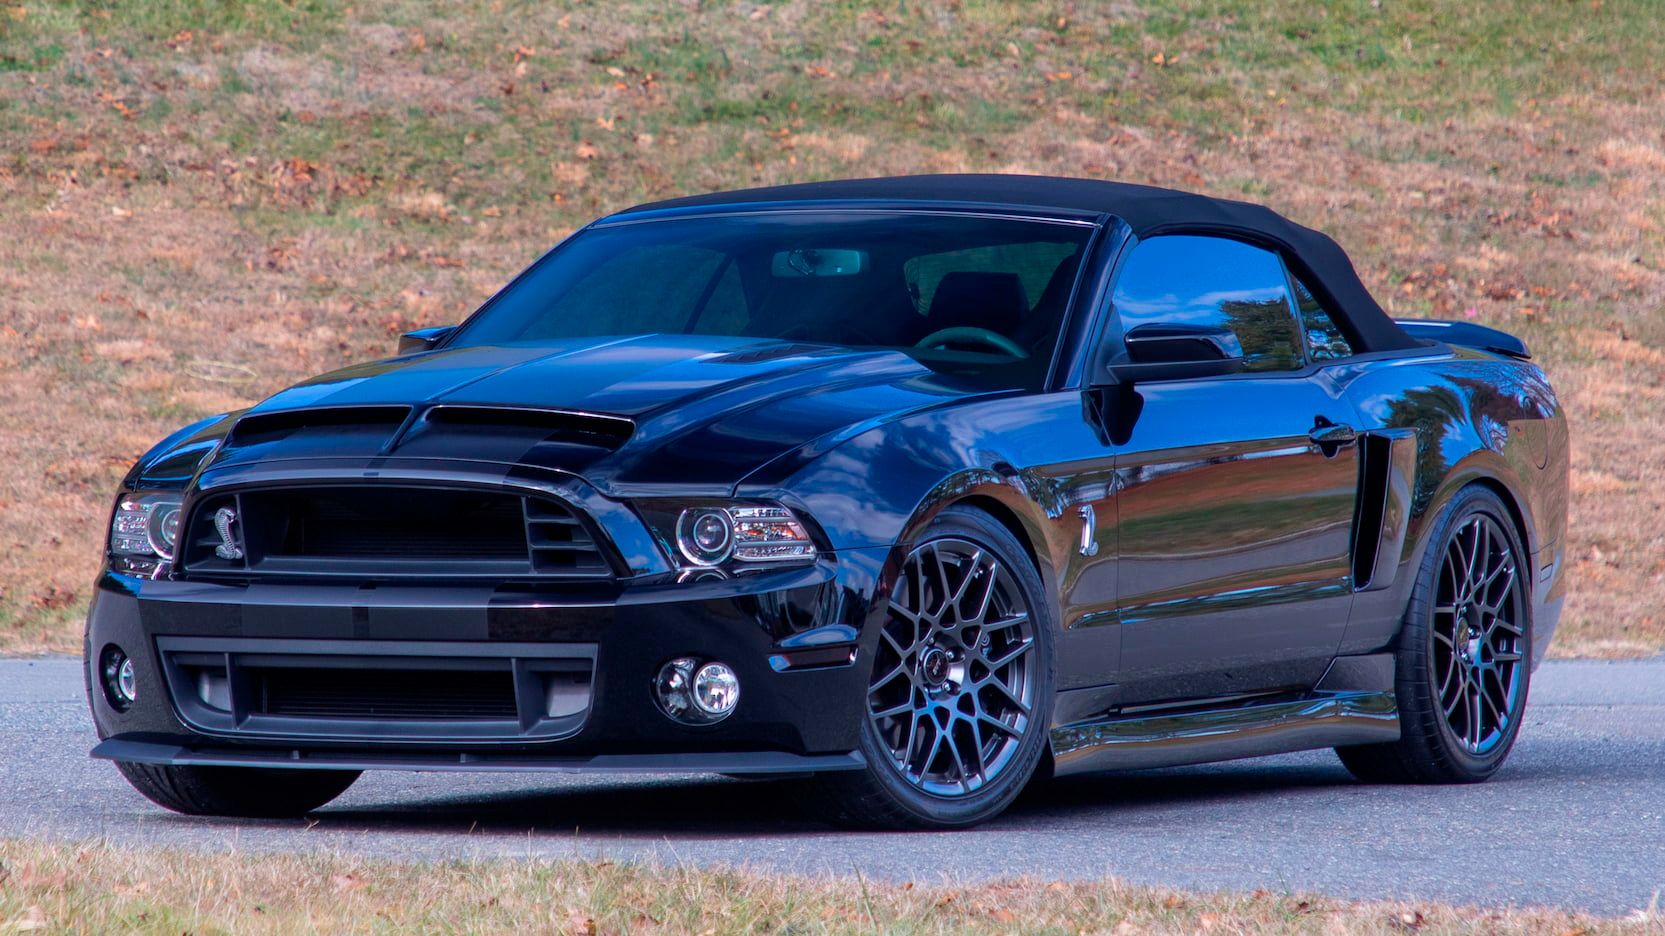 2014 Ford Mustang Shelby GT500: The muscle car for all ages.